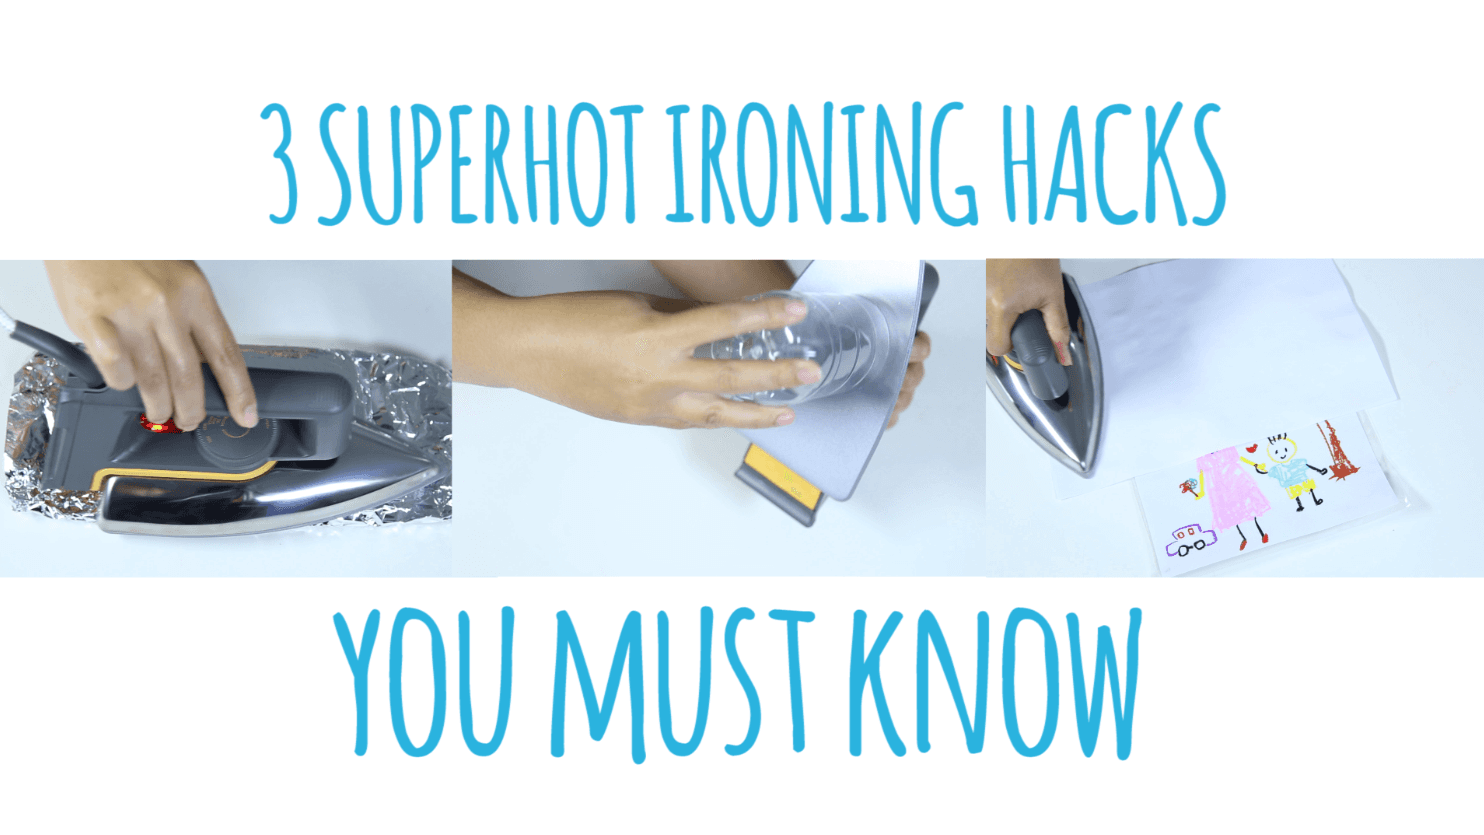 3 Superhot Ironing Hacks, You Must Know